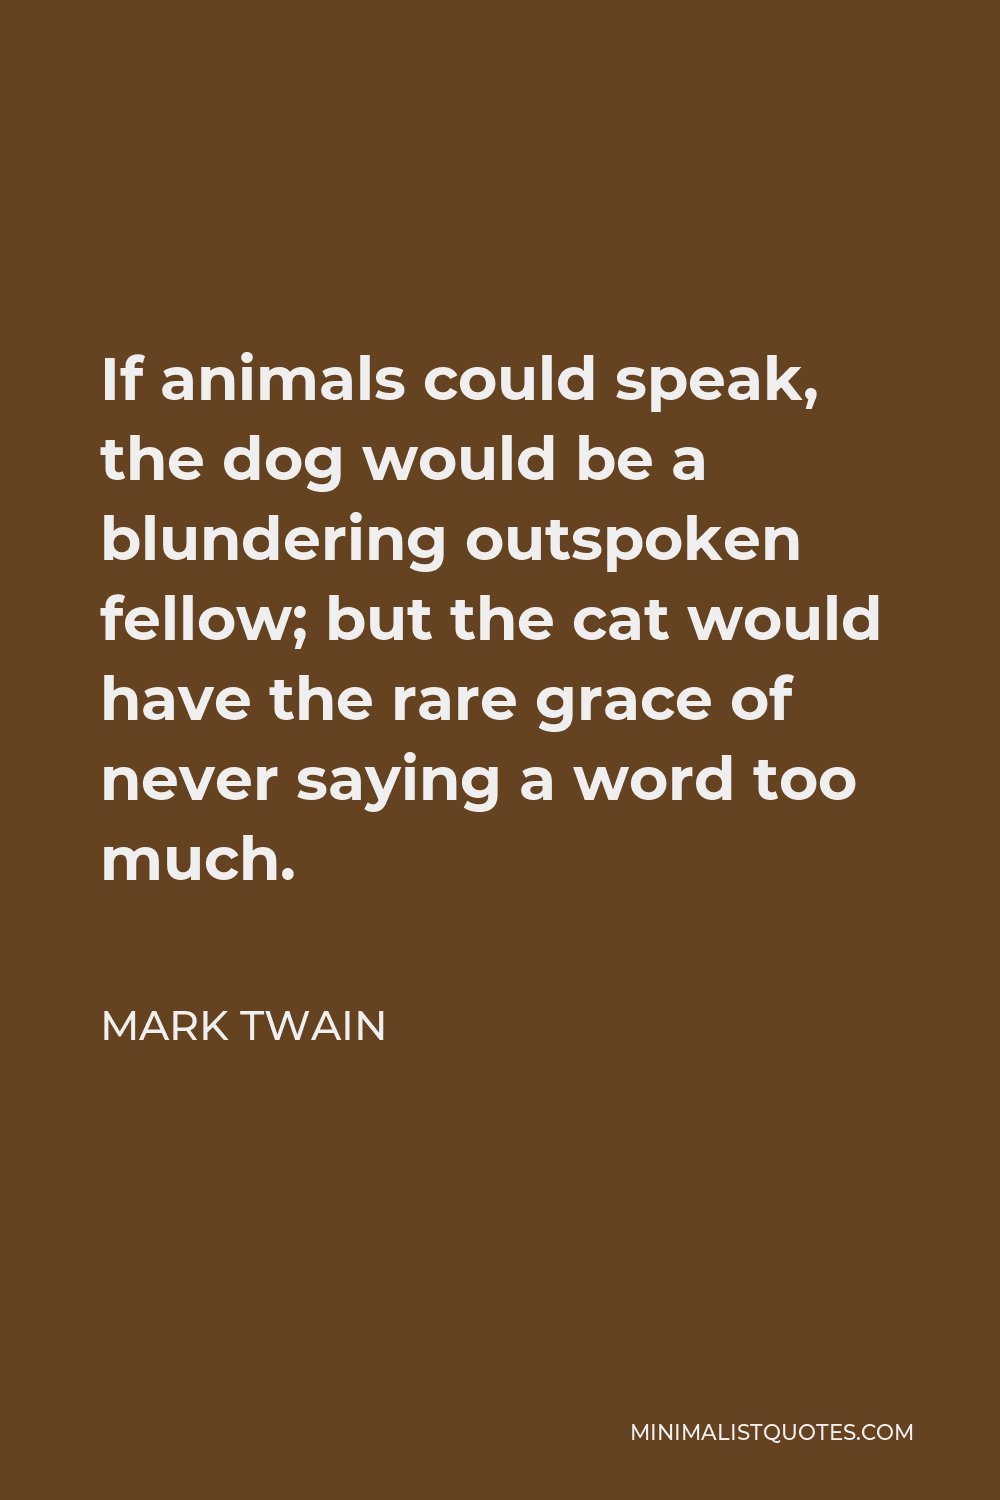 Mark Twain - If animals could speak, the dog would be a blundering  outspoken fellow; but the cat would have the rare grace of never saying a  word too much. Sticker for